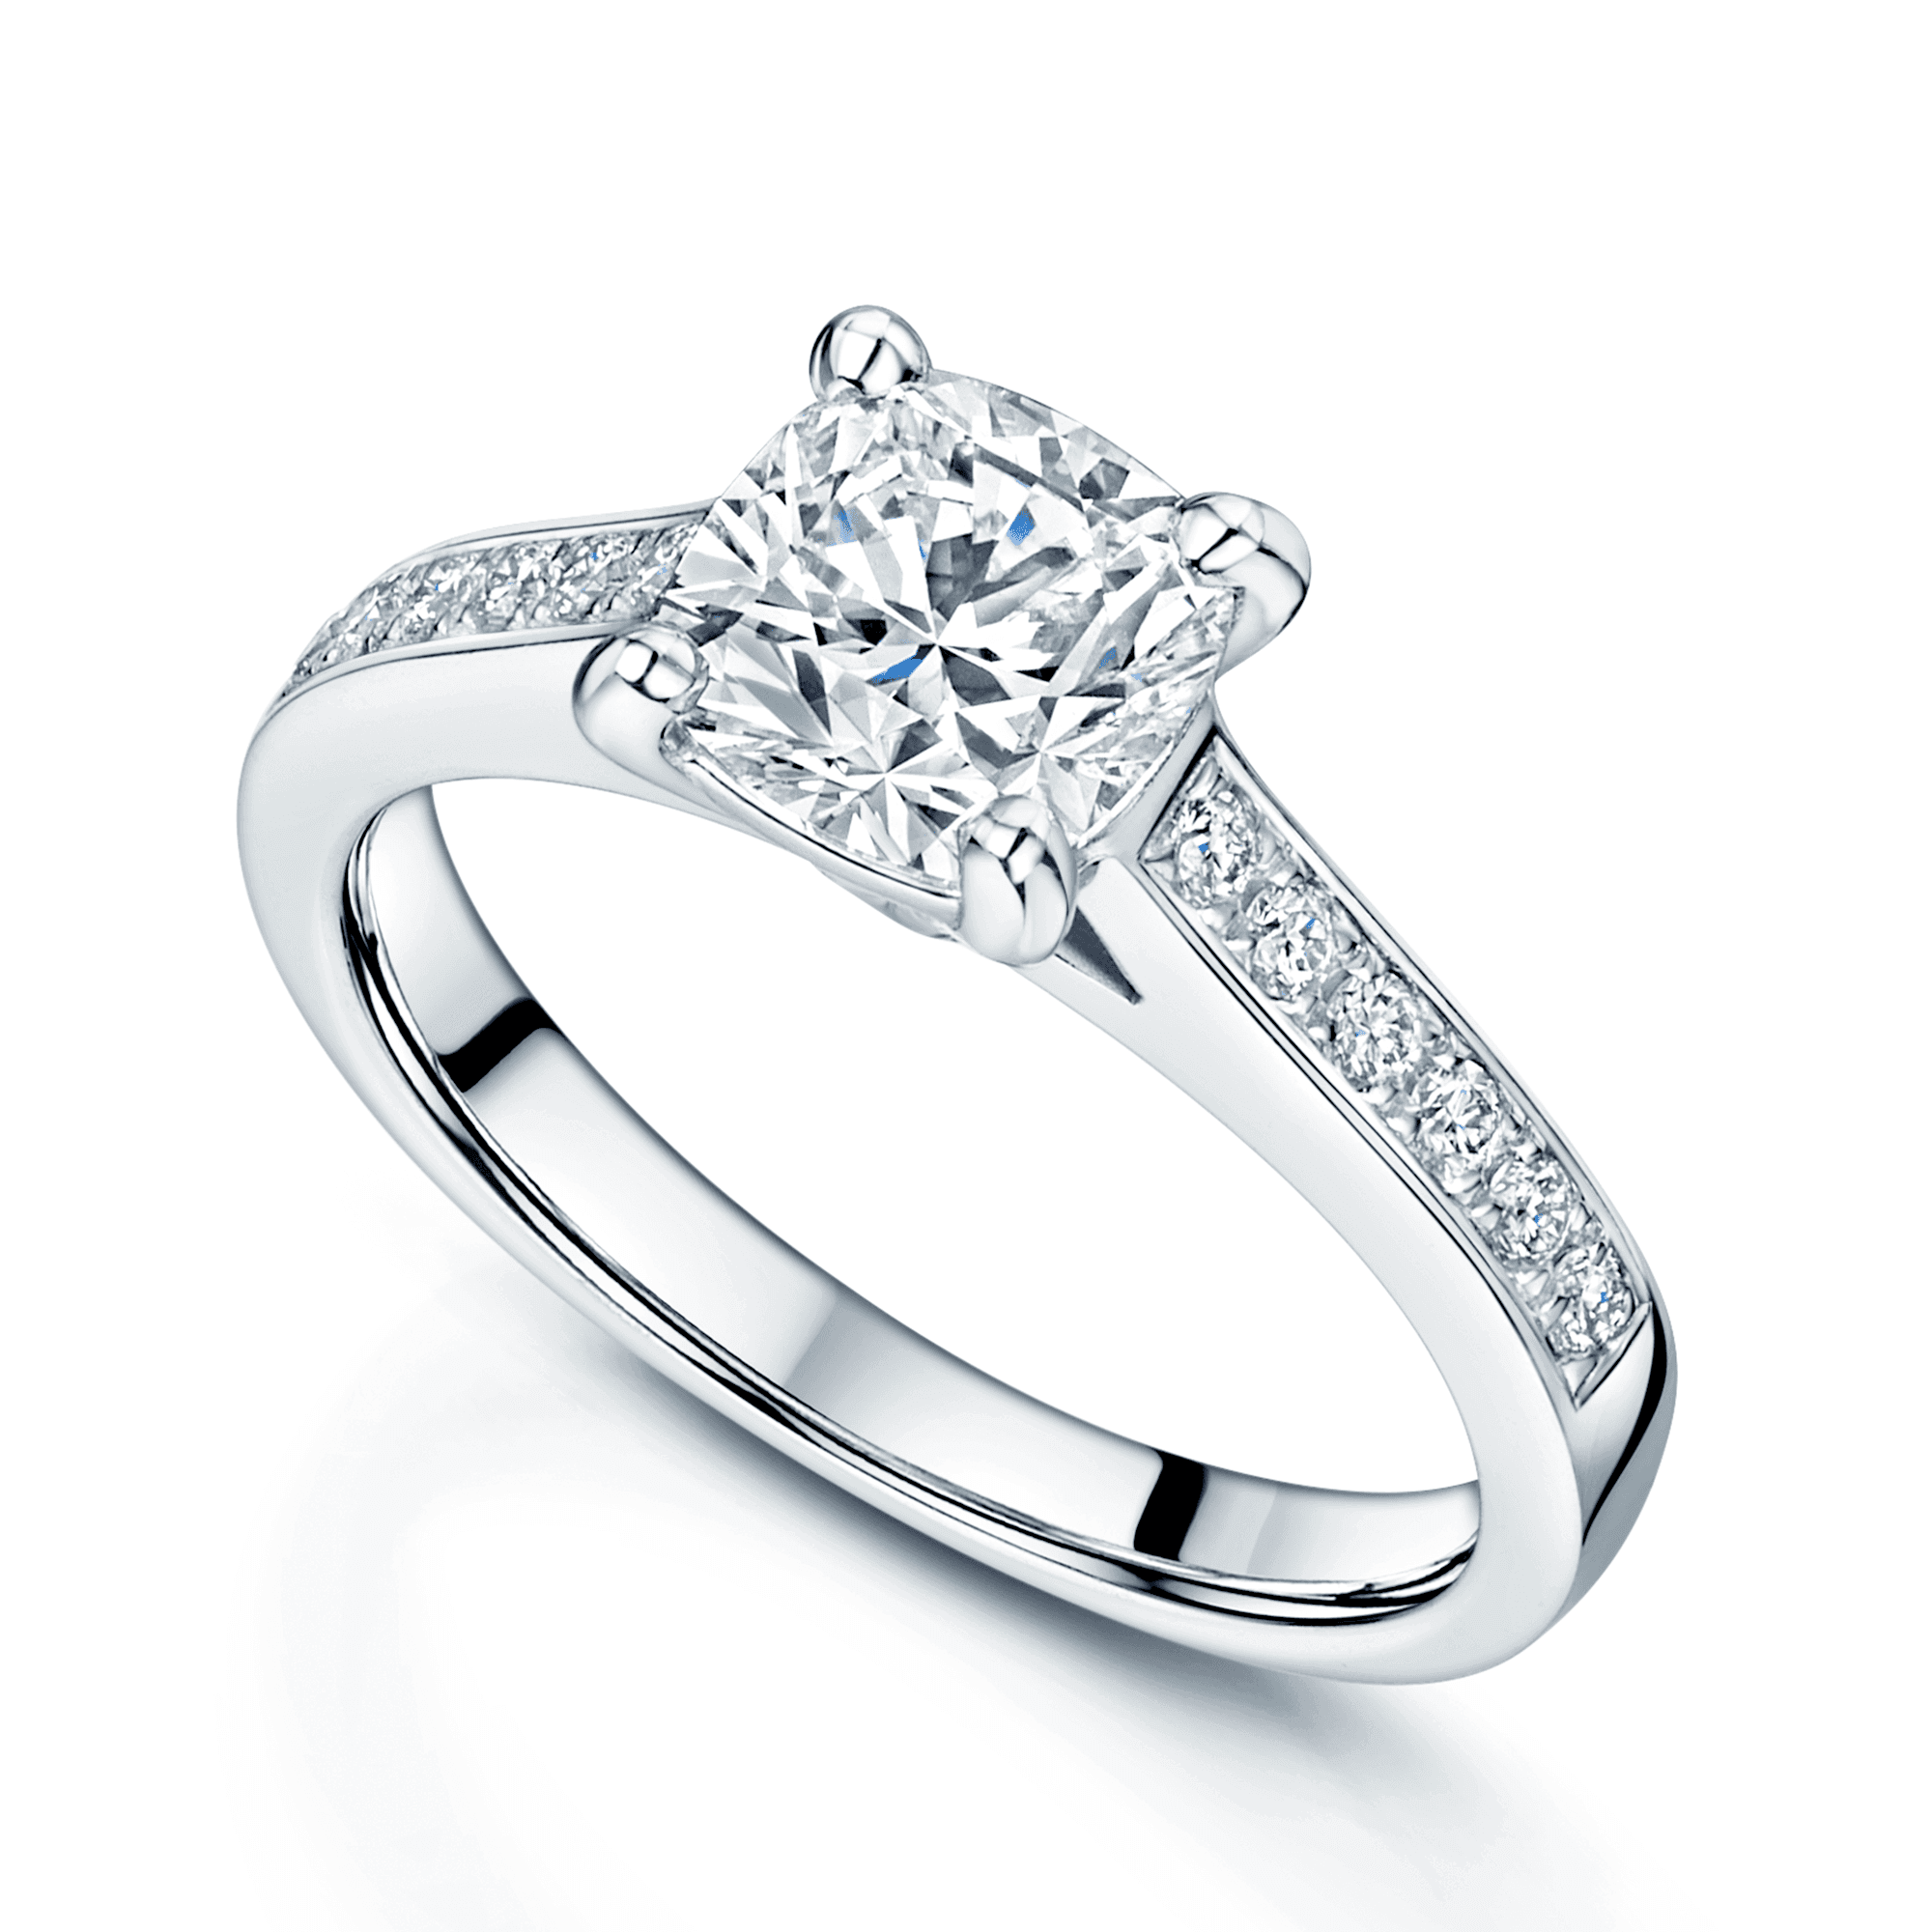 Platinum GIA Certificated Cushion Shape Diamond Solitaire Ring With Diamond Set Shoulders